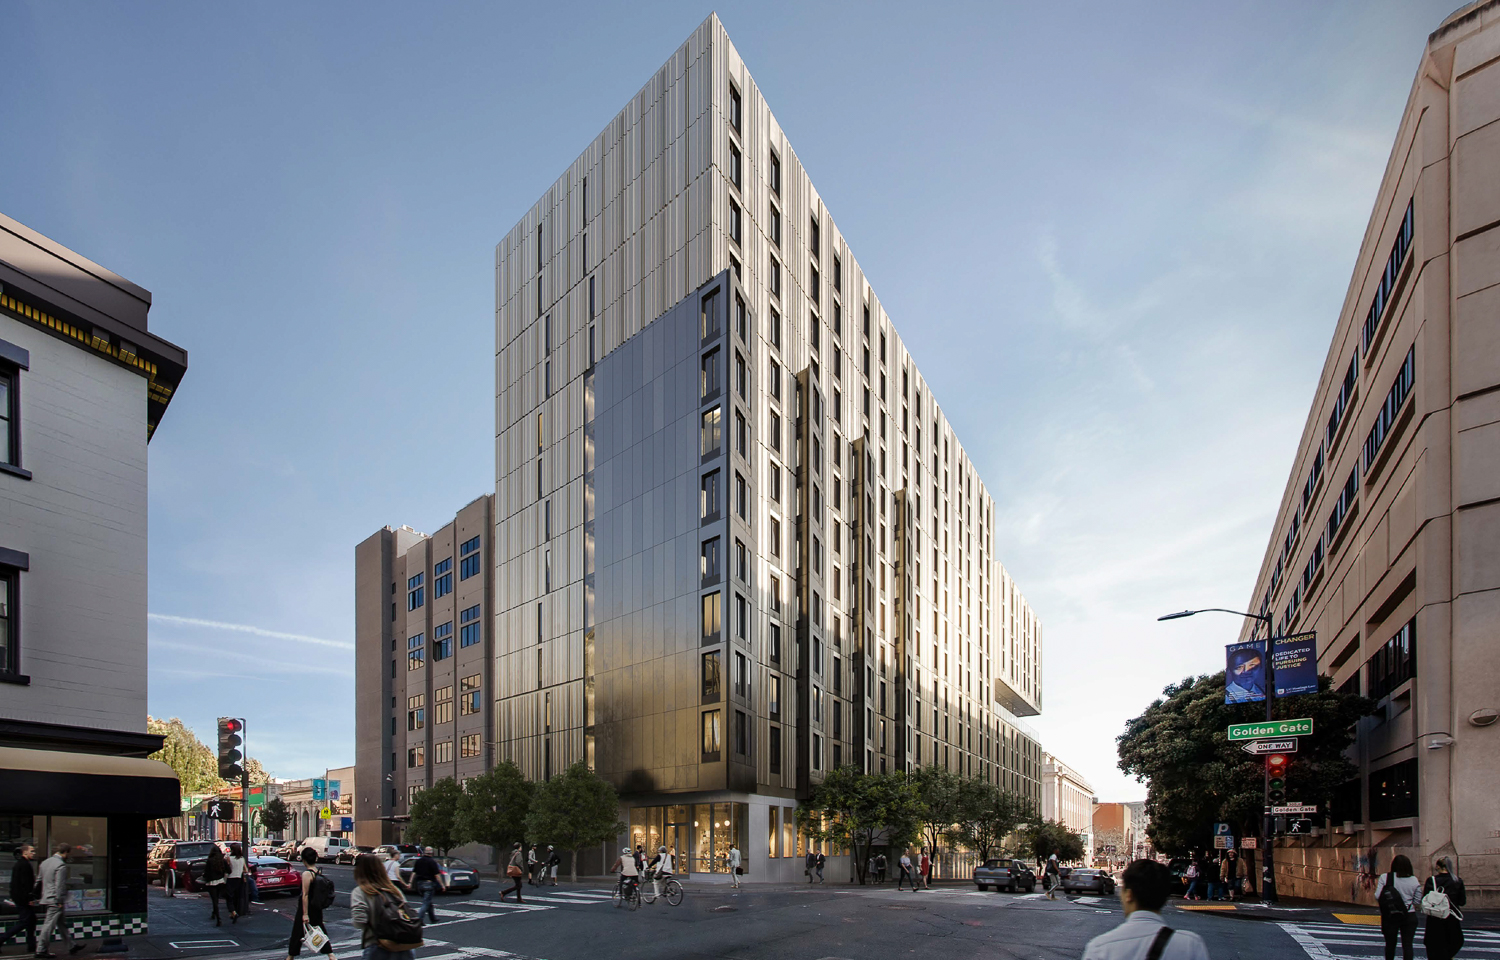 198 McAllister Street Academic Village from across Turk Street, rendering courtesy UC Hastings Law, architecture by Perkins&Will